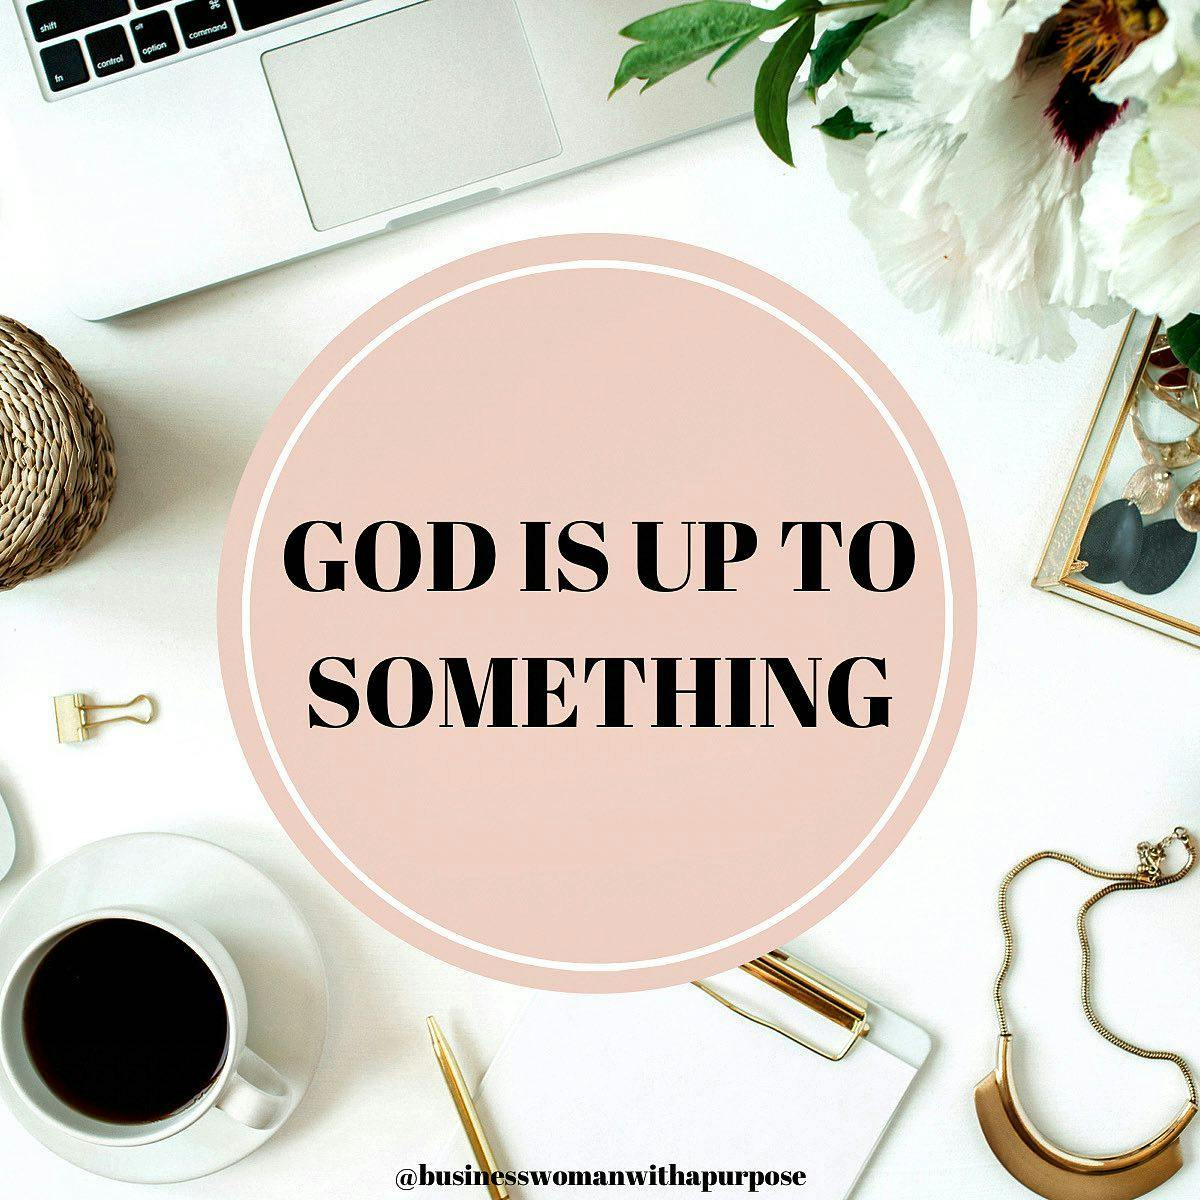 God is up to something in your life. You can’t see it, but He is working in the background on your behalf. Get prepared and get excited for what God is about to do in your life!
•
•
Have you been preparing for what God is about to do in your life?